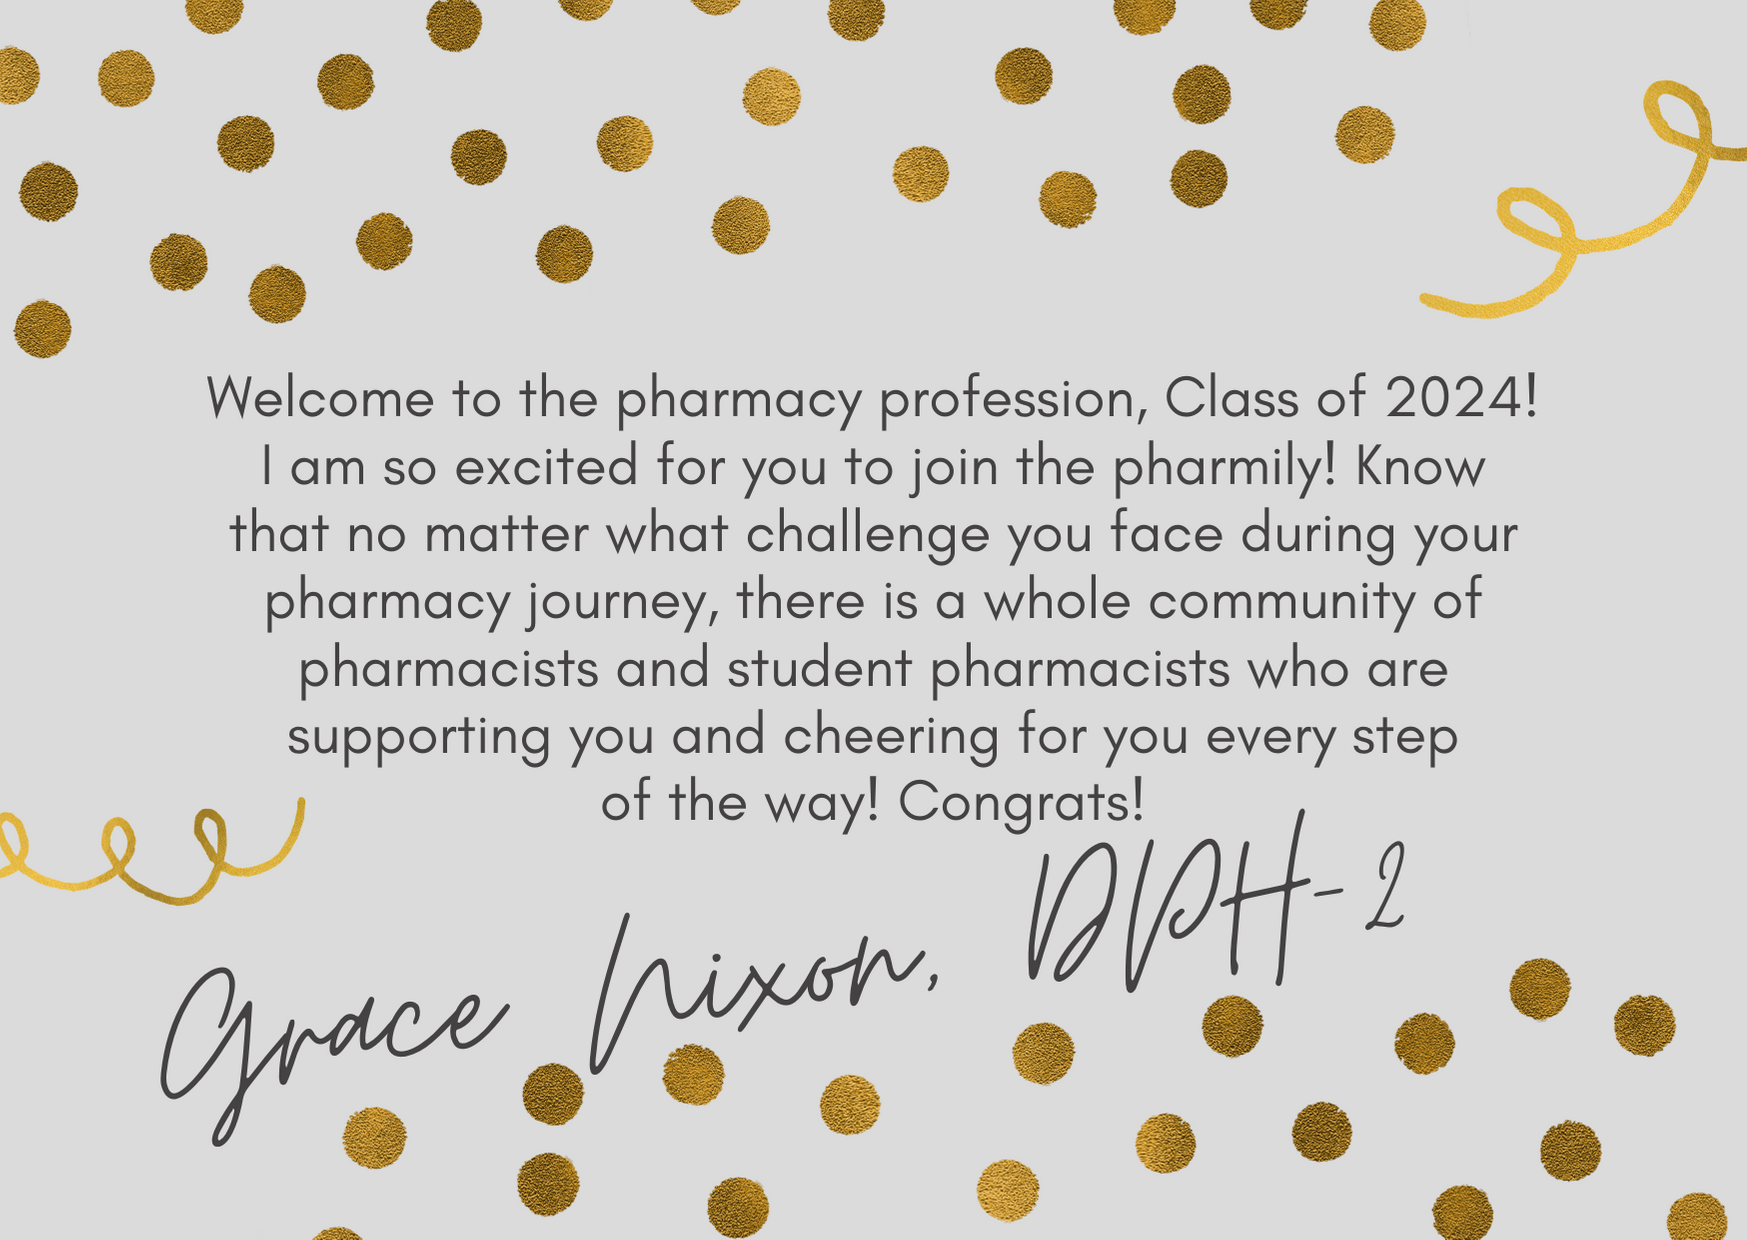 Grace Nixon's note for the White Coat ceremony to the class of 2024